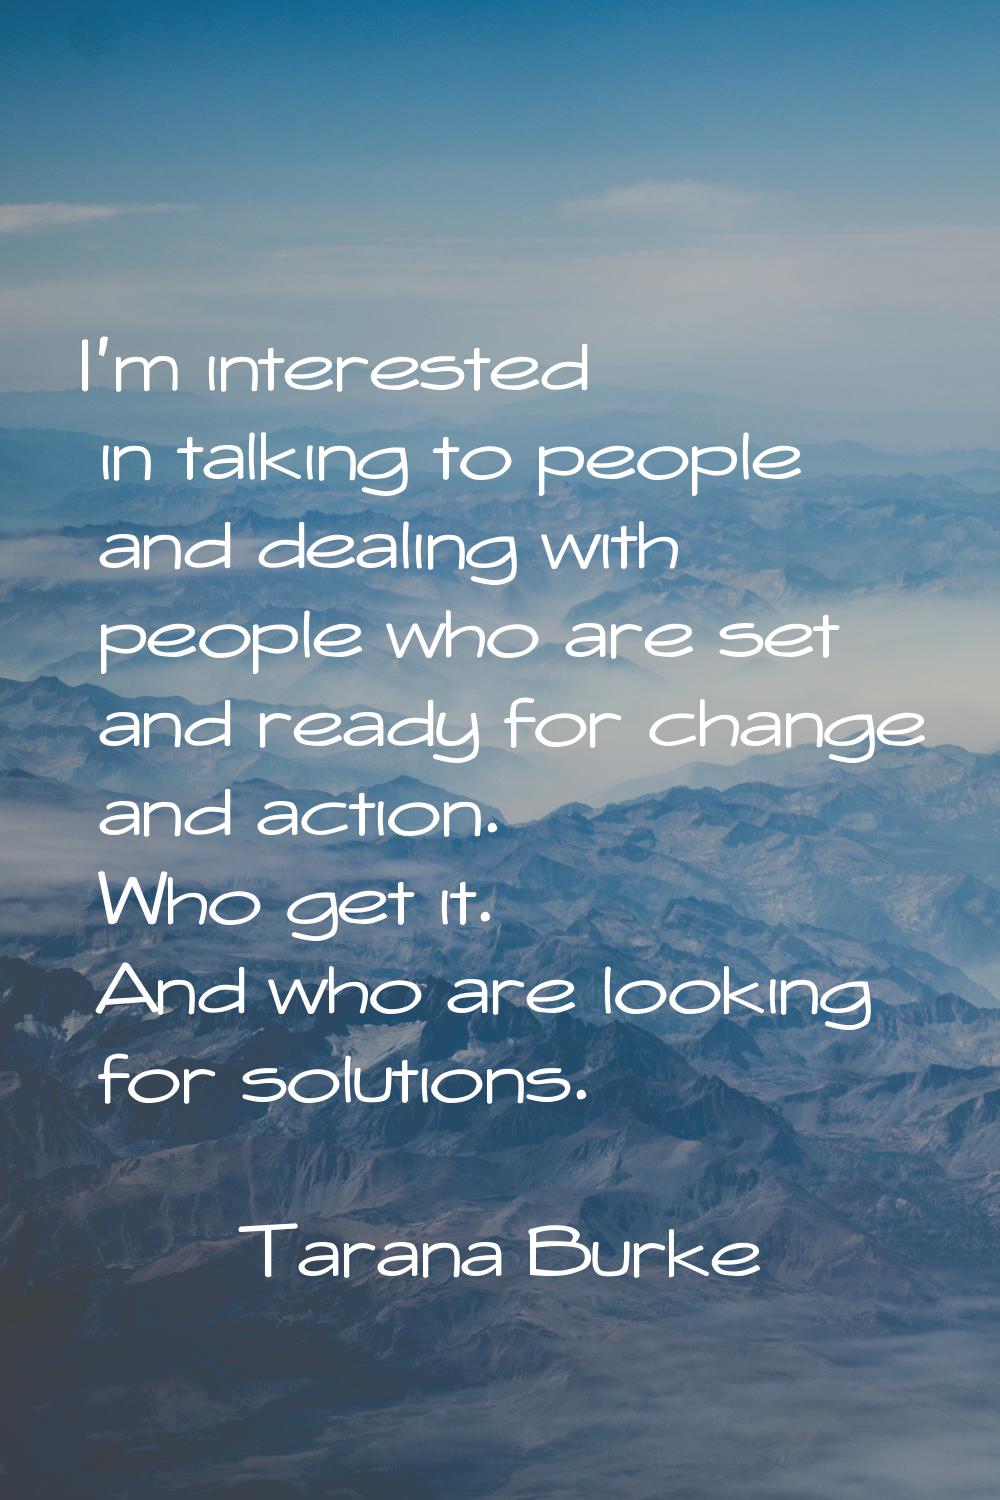 I'm interested in talking to people and dealing with people who are set and ready for change and ac